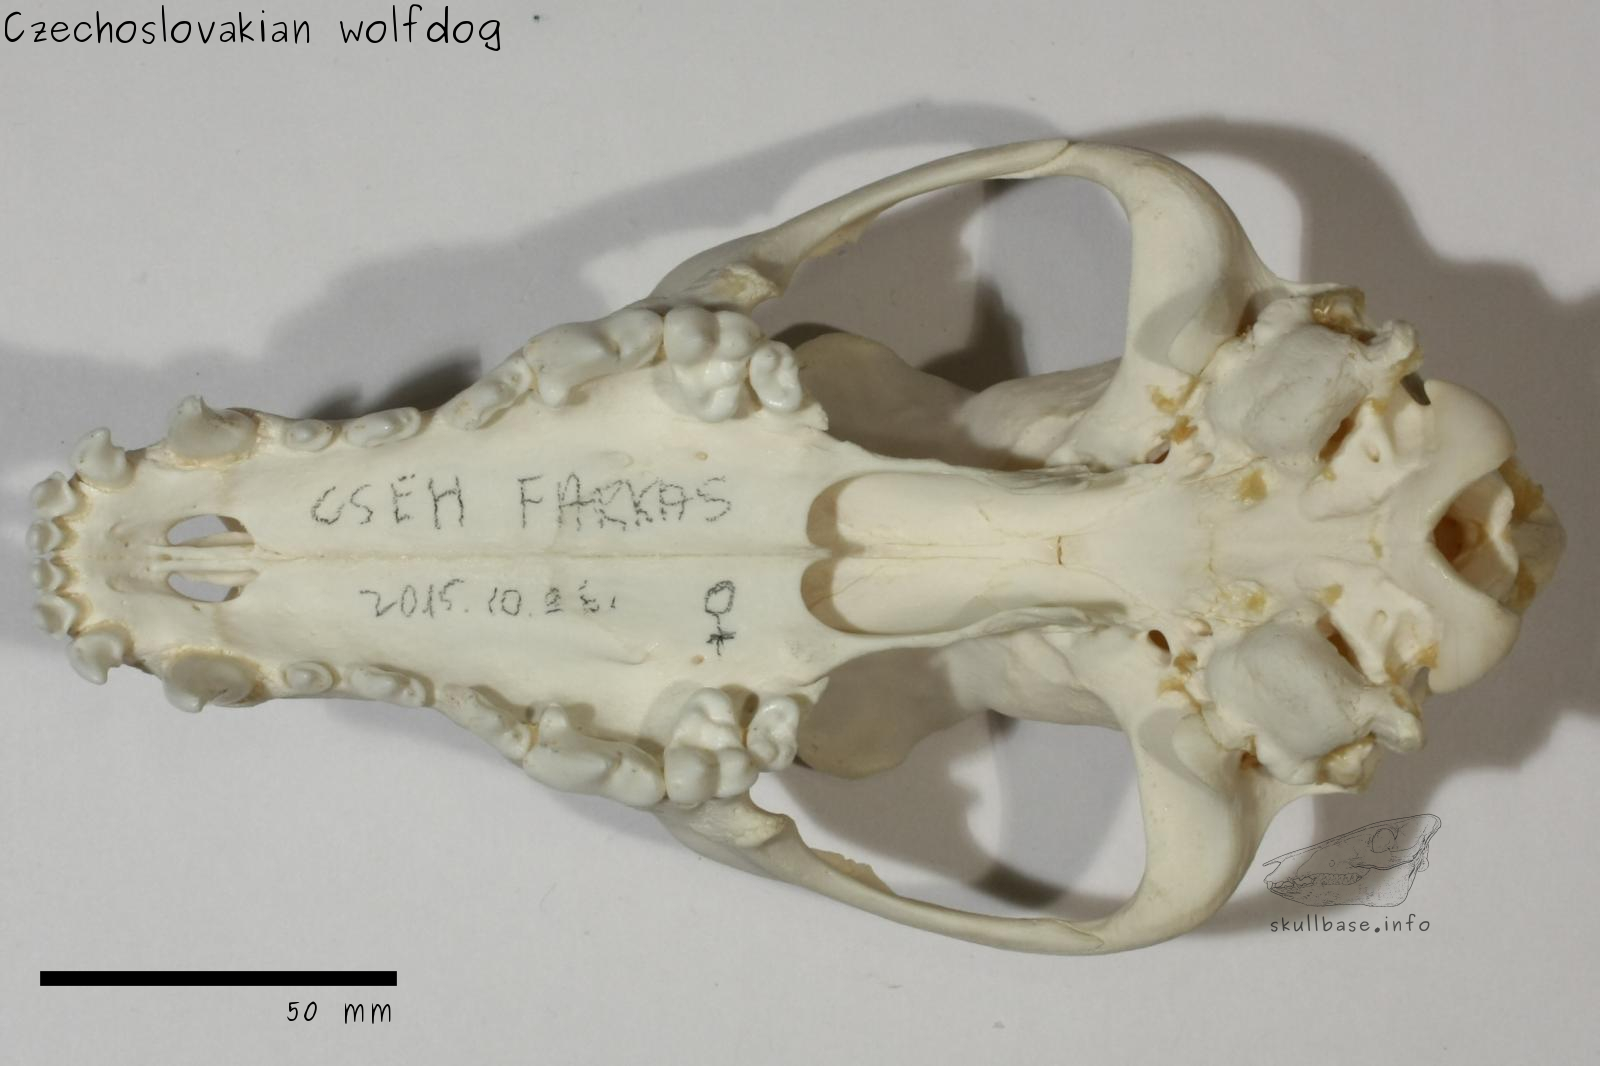 Czechoslovakian wolfdog (Canis lupus familiaris) skull ventral view